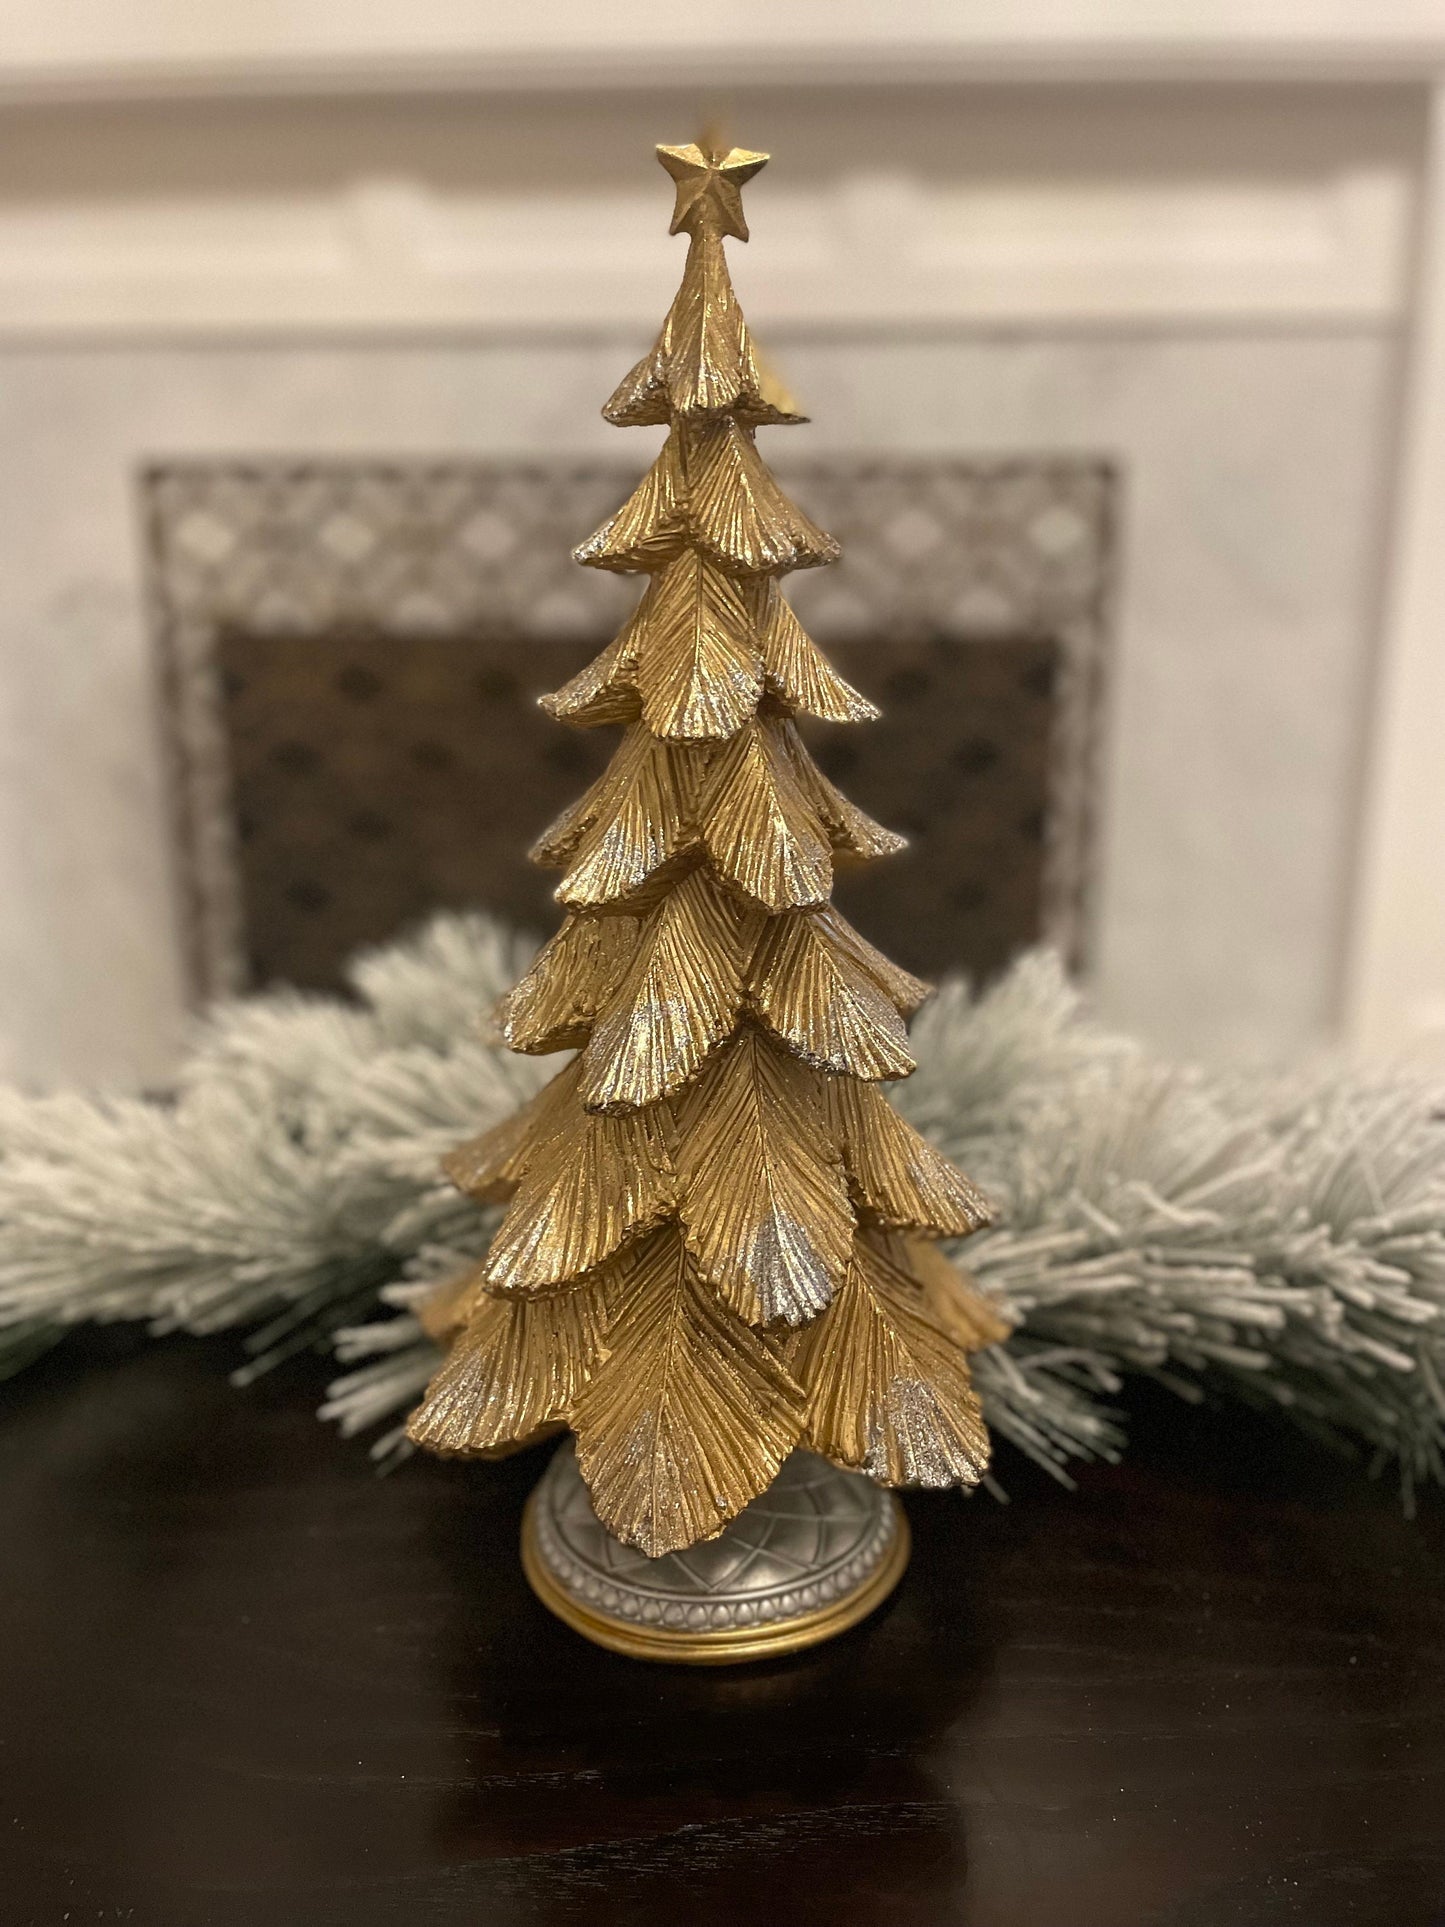 18”H x 9” W Resin gold and silver tree.